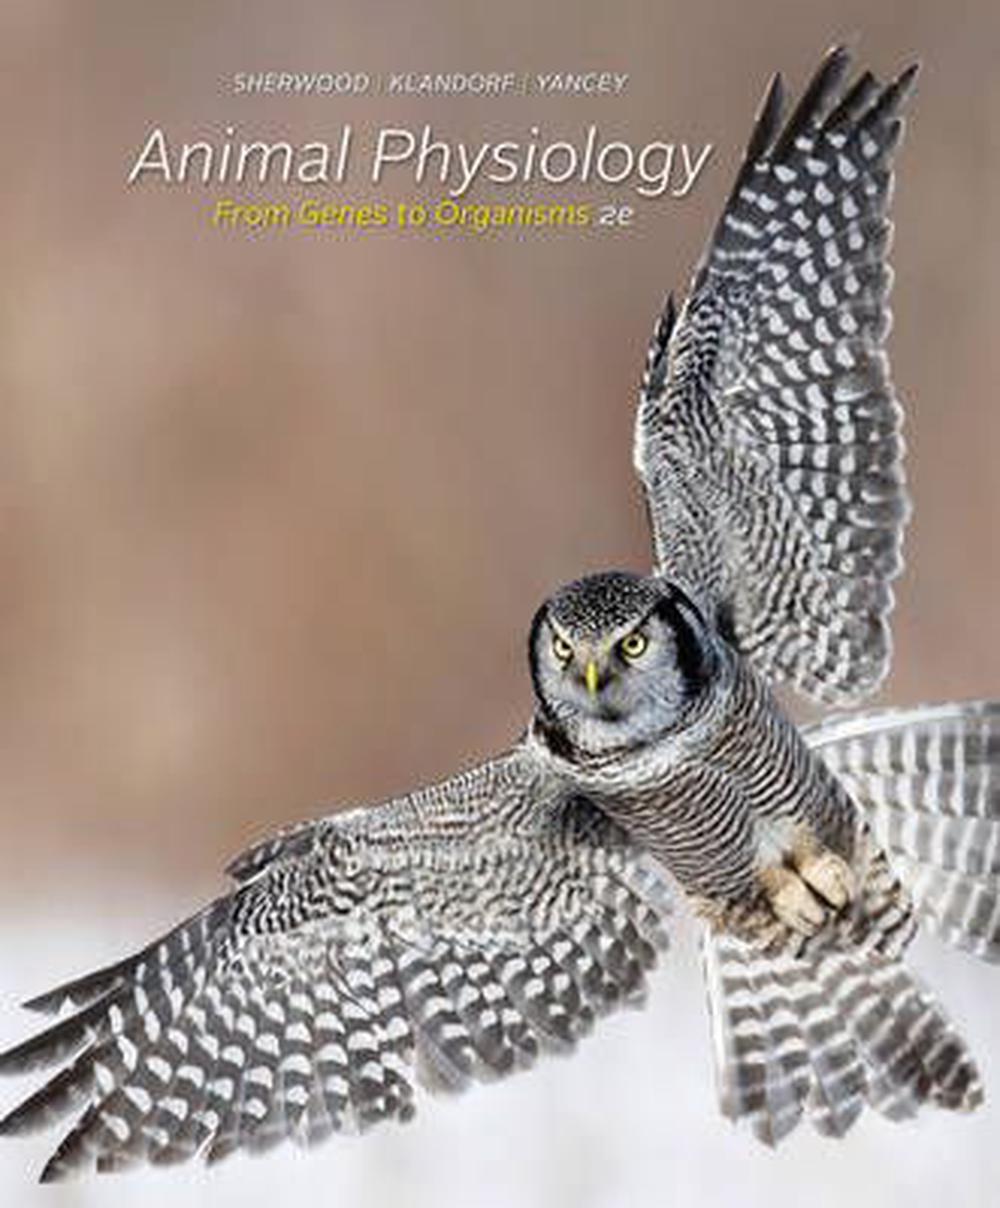 Animal Physiology, 2nd Edition by Paul H. Yancey, Hardcover